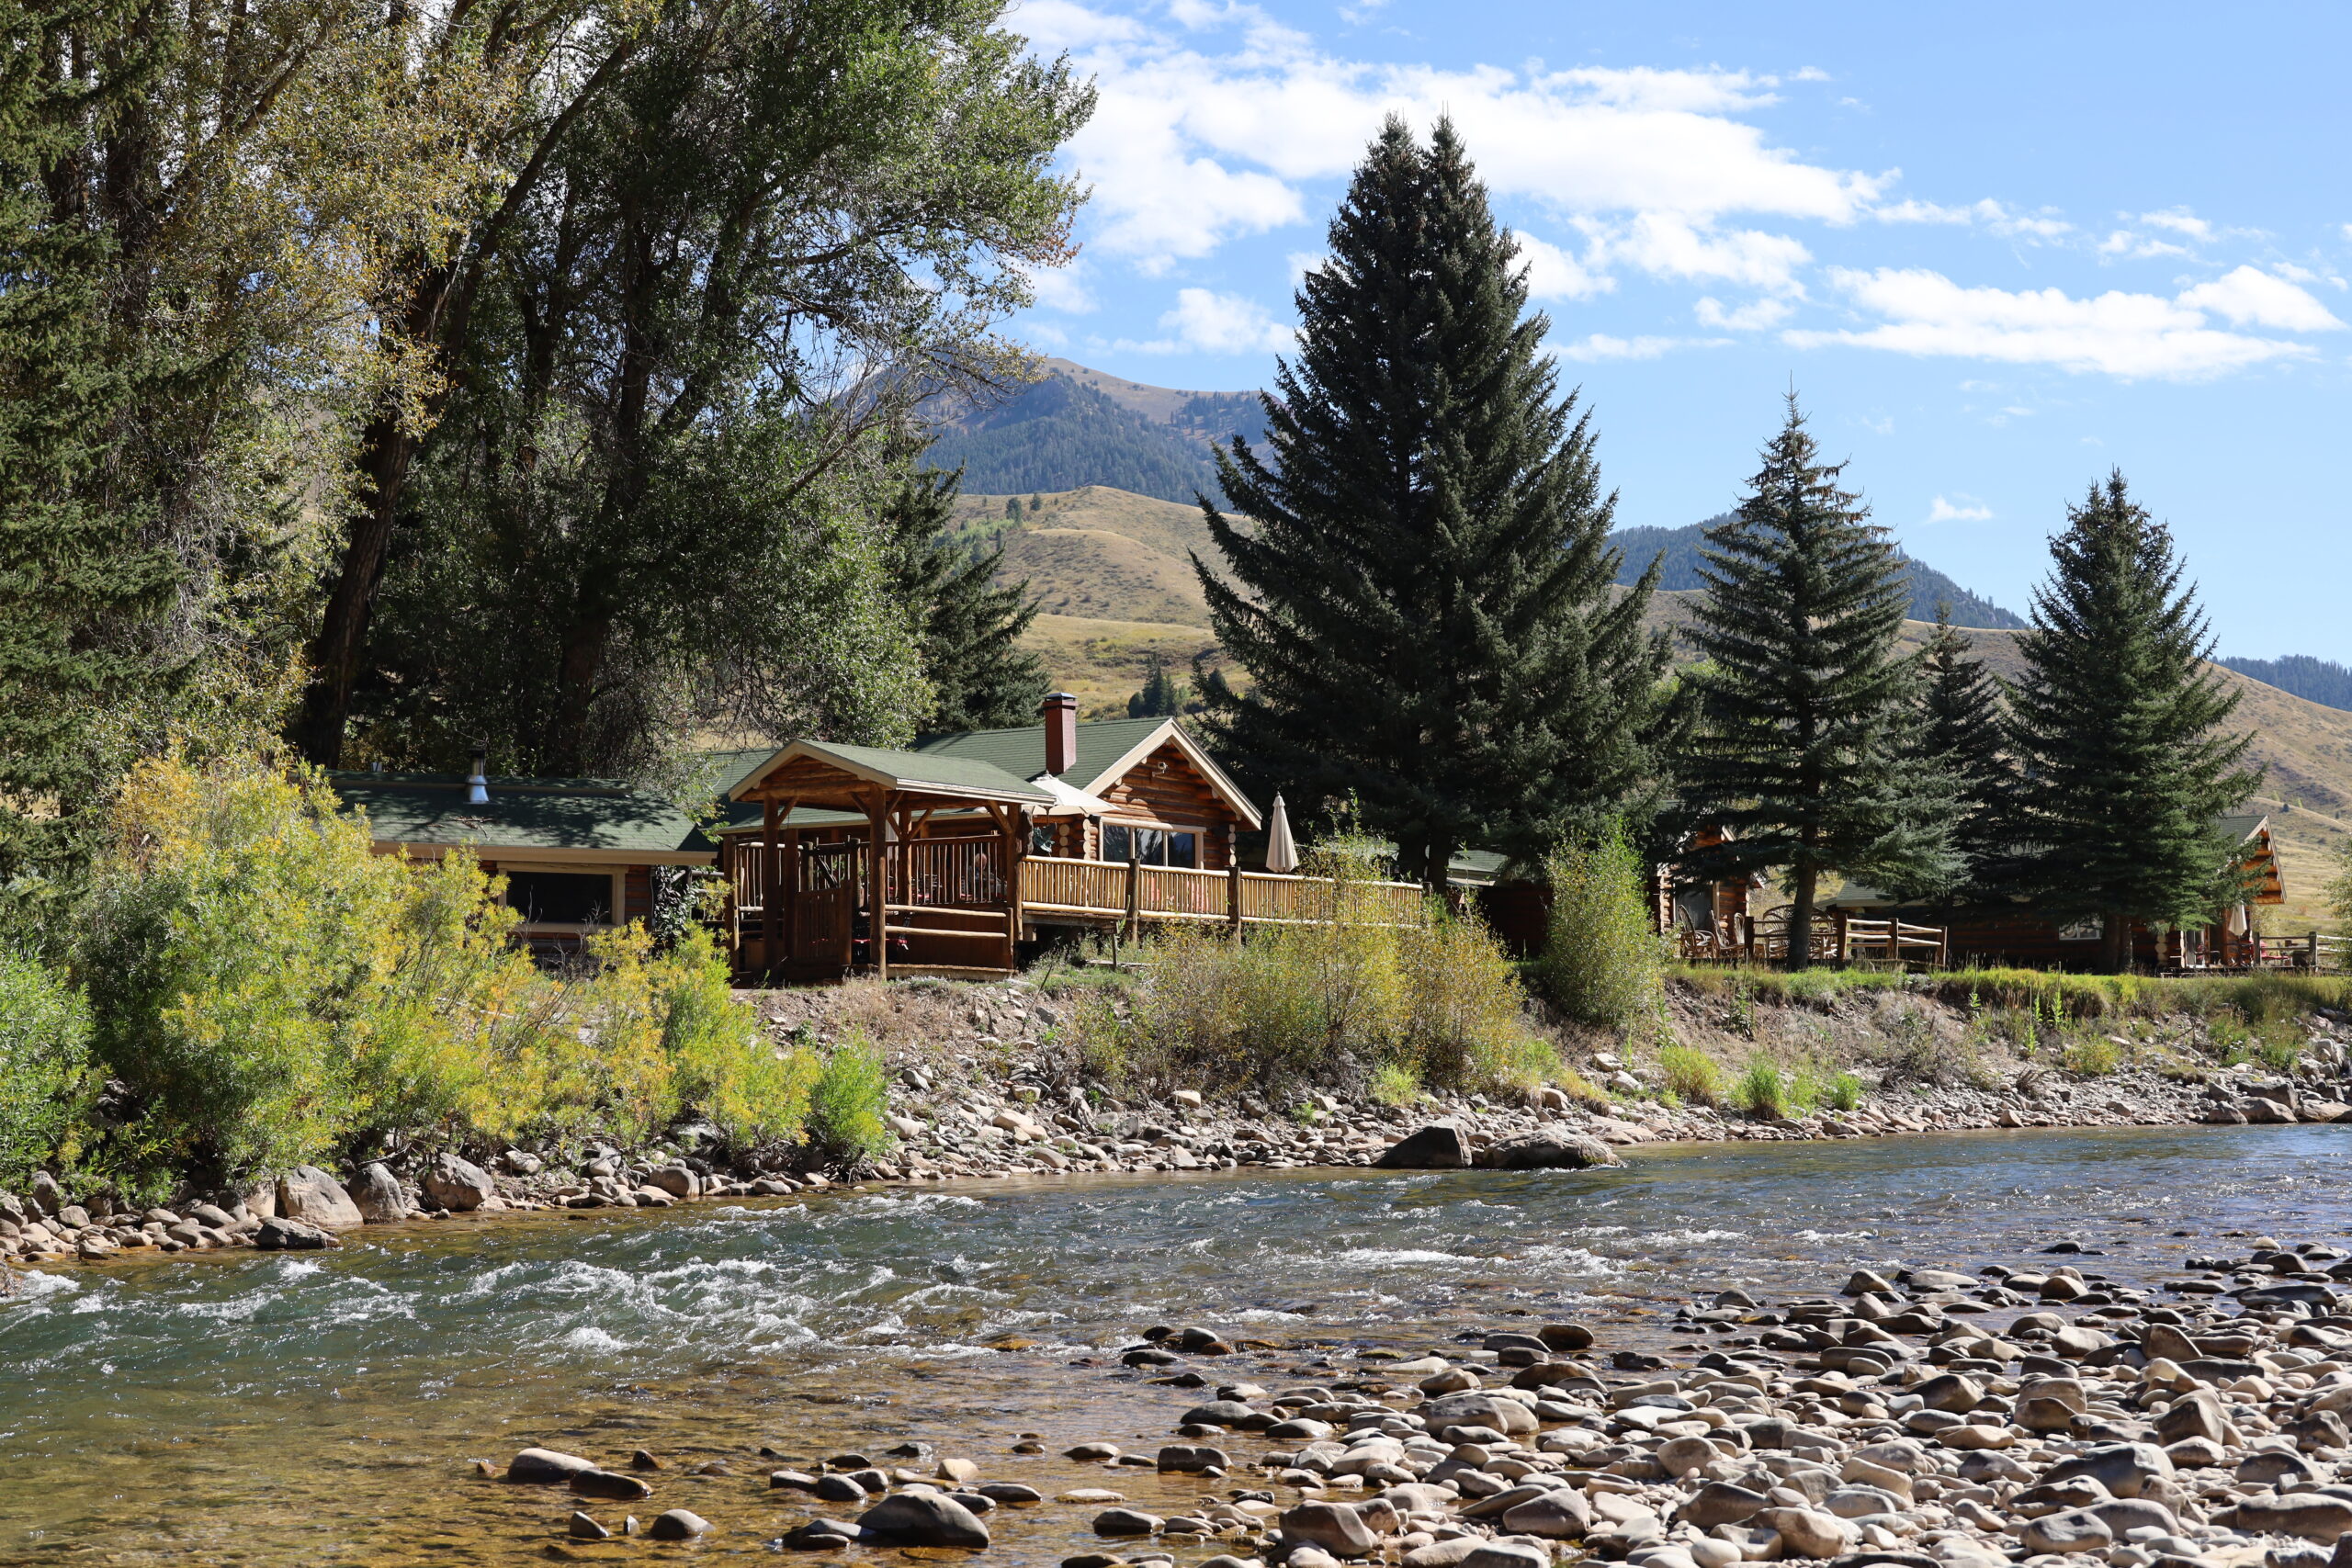 Review of Spotted Horse Ranch: Wyoming’s Best Dude Ranch?